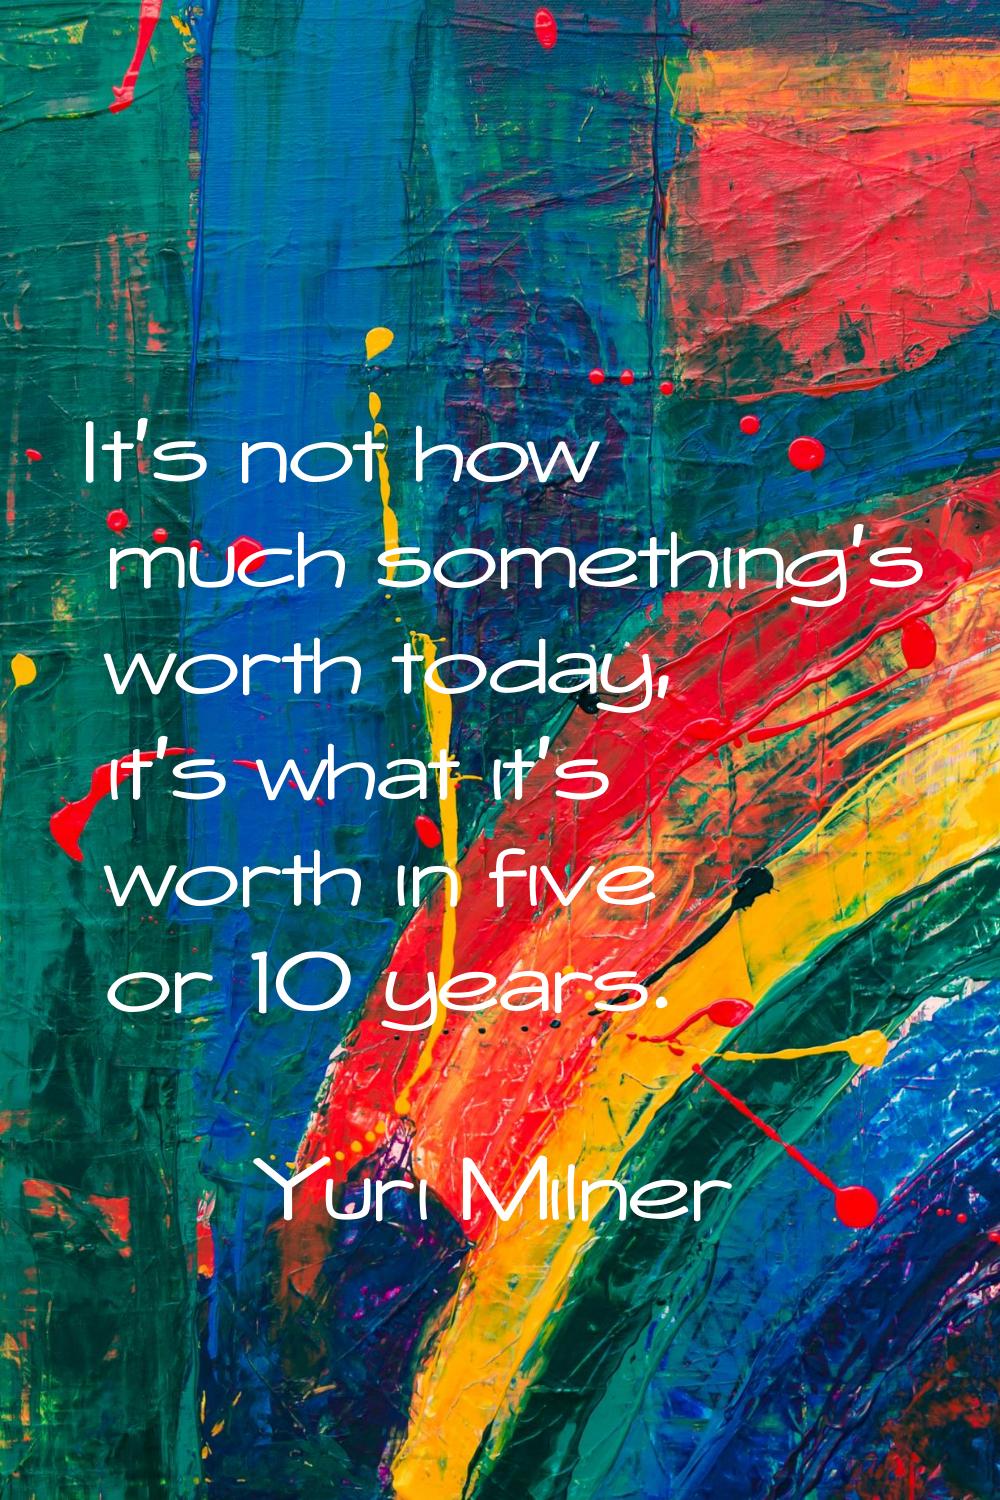 It's not how much something's worth today, it's what it's worth in five or 10 years.